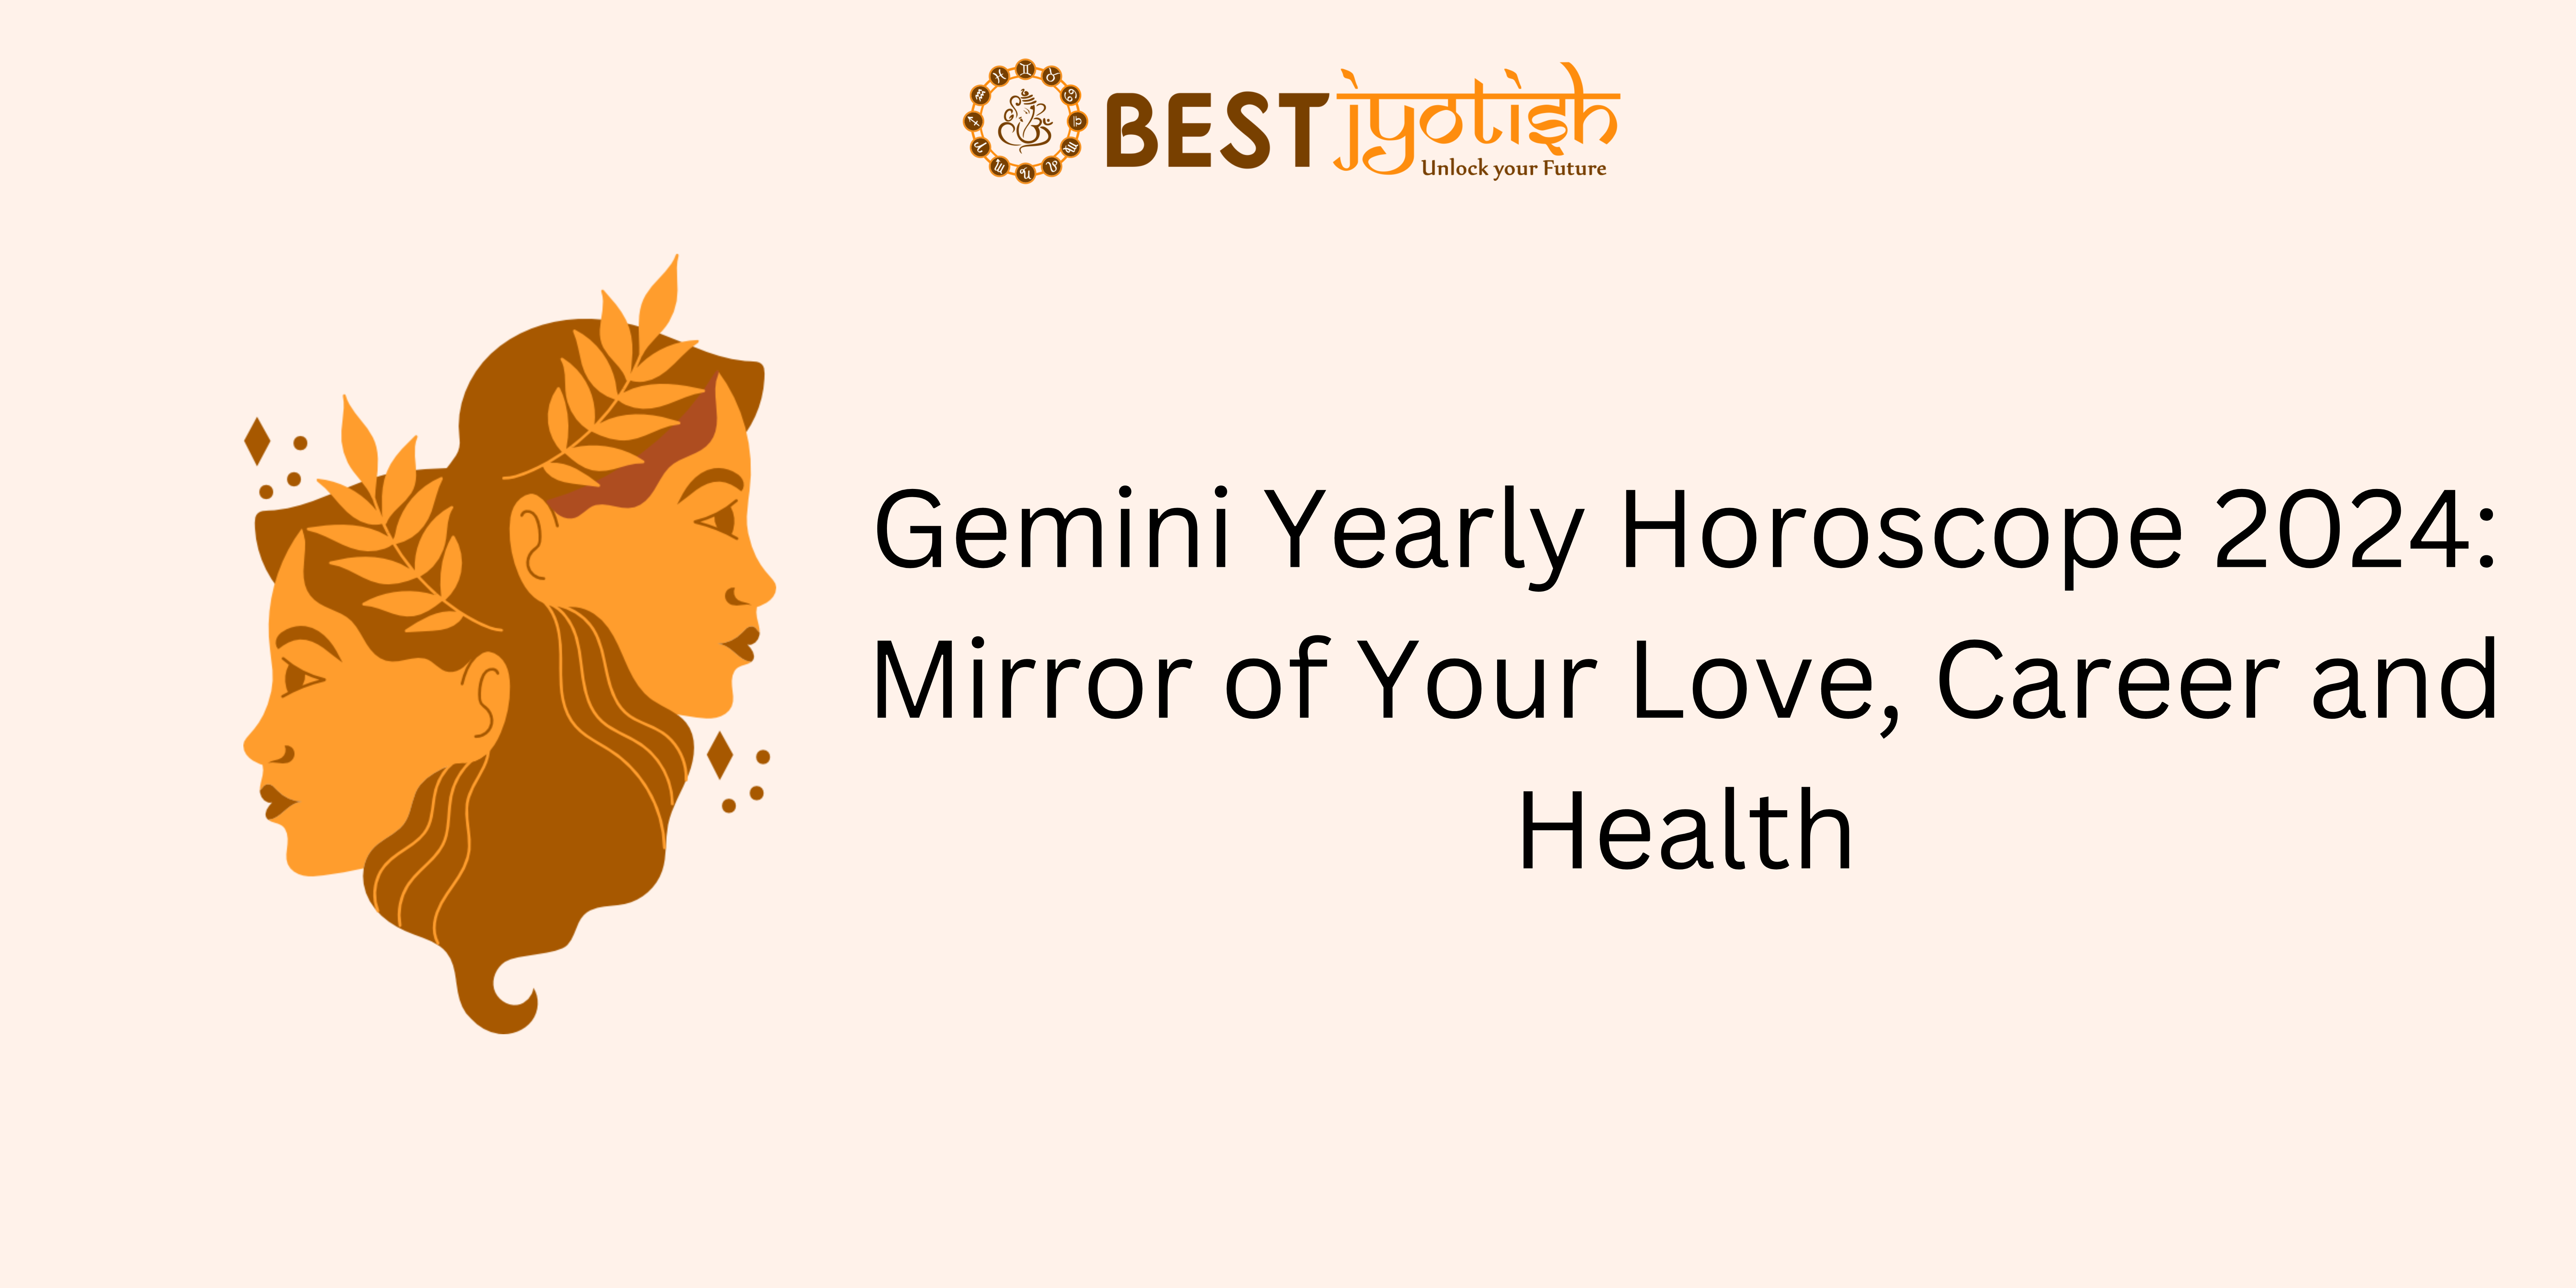 Gemini Yearly Horoscope 2024: Mirror of Your Love, Career and Health